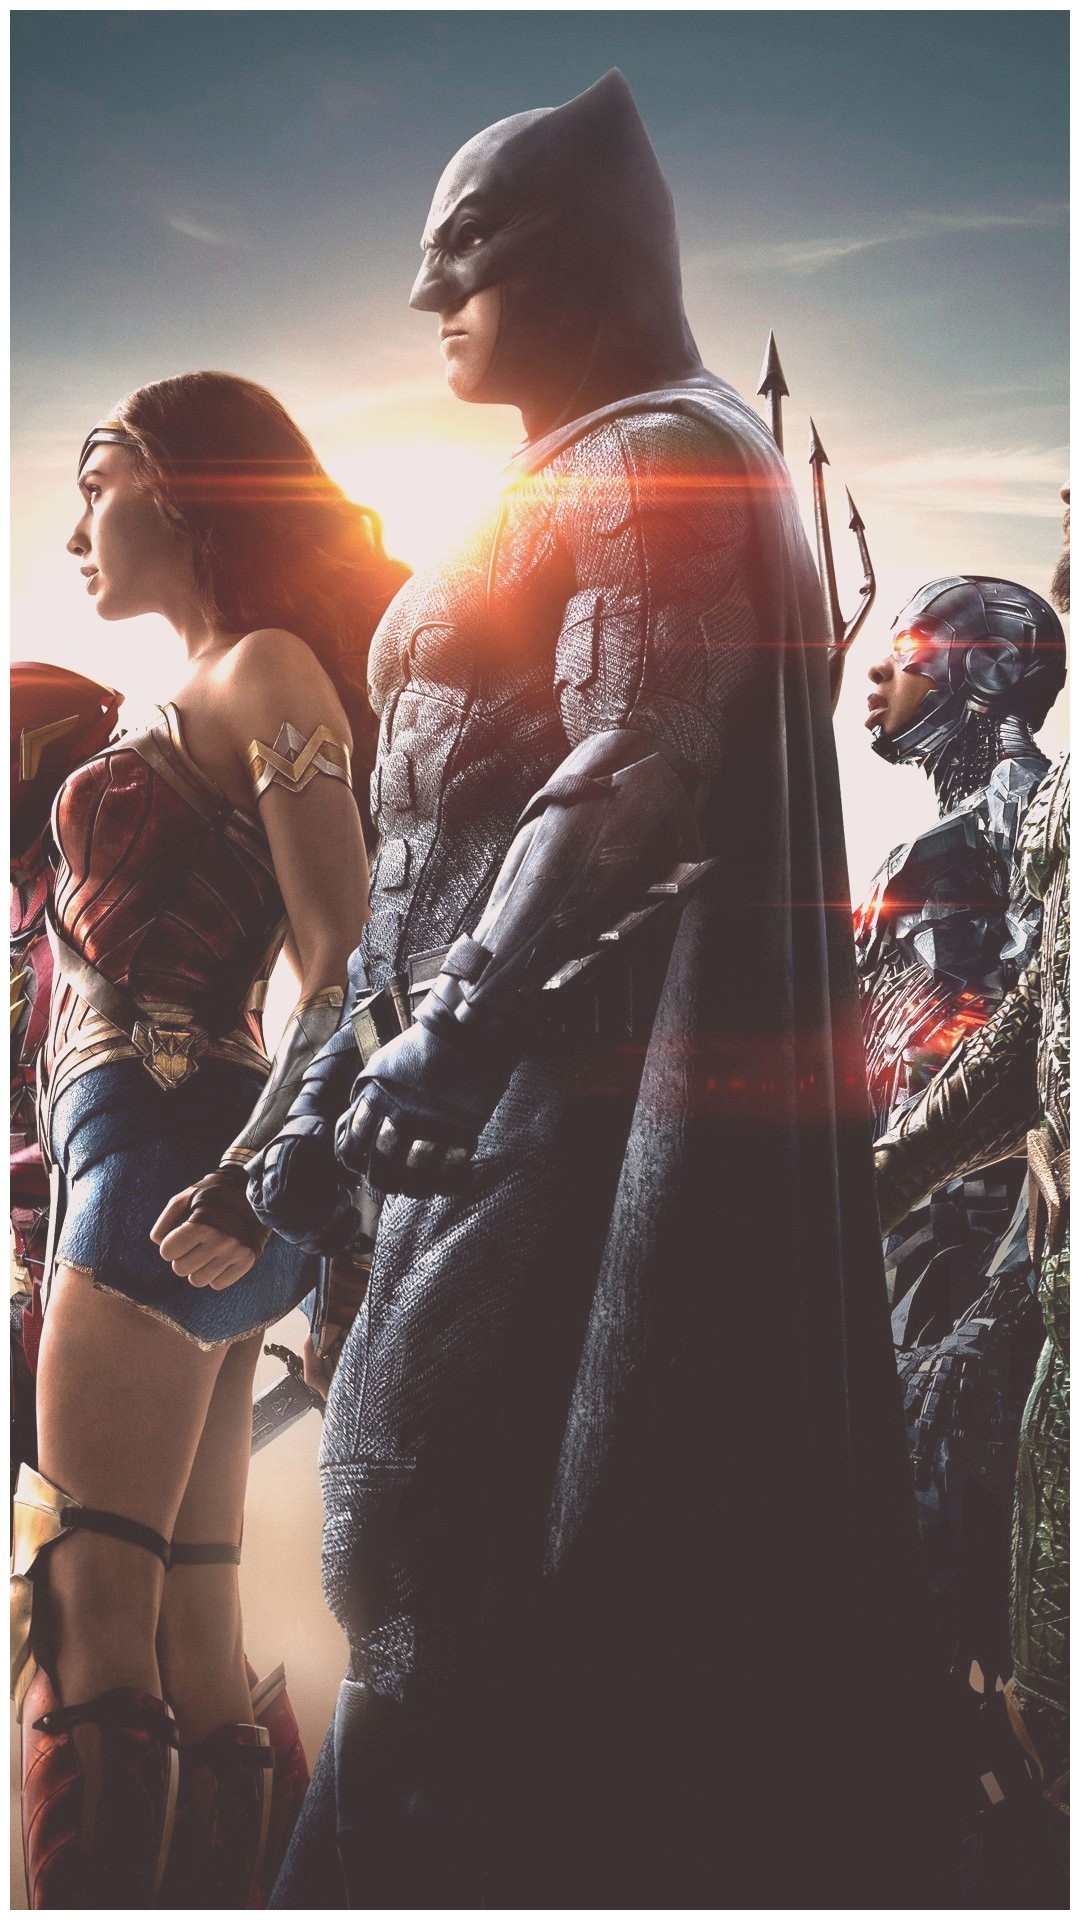 1080x1920 Justice League Movie iPhone Wallpaper Hd